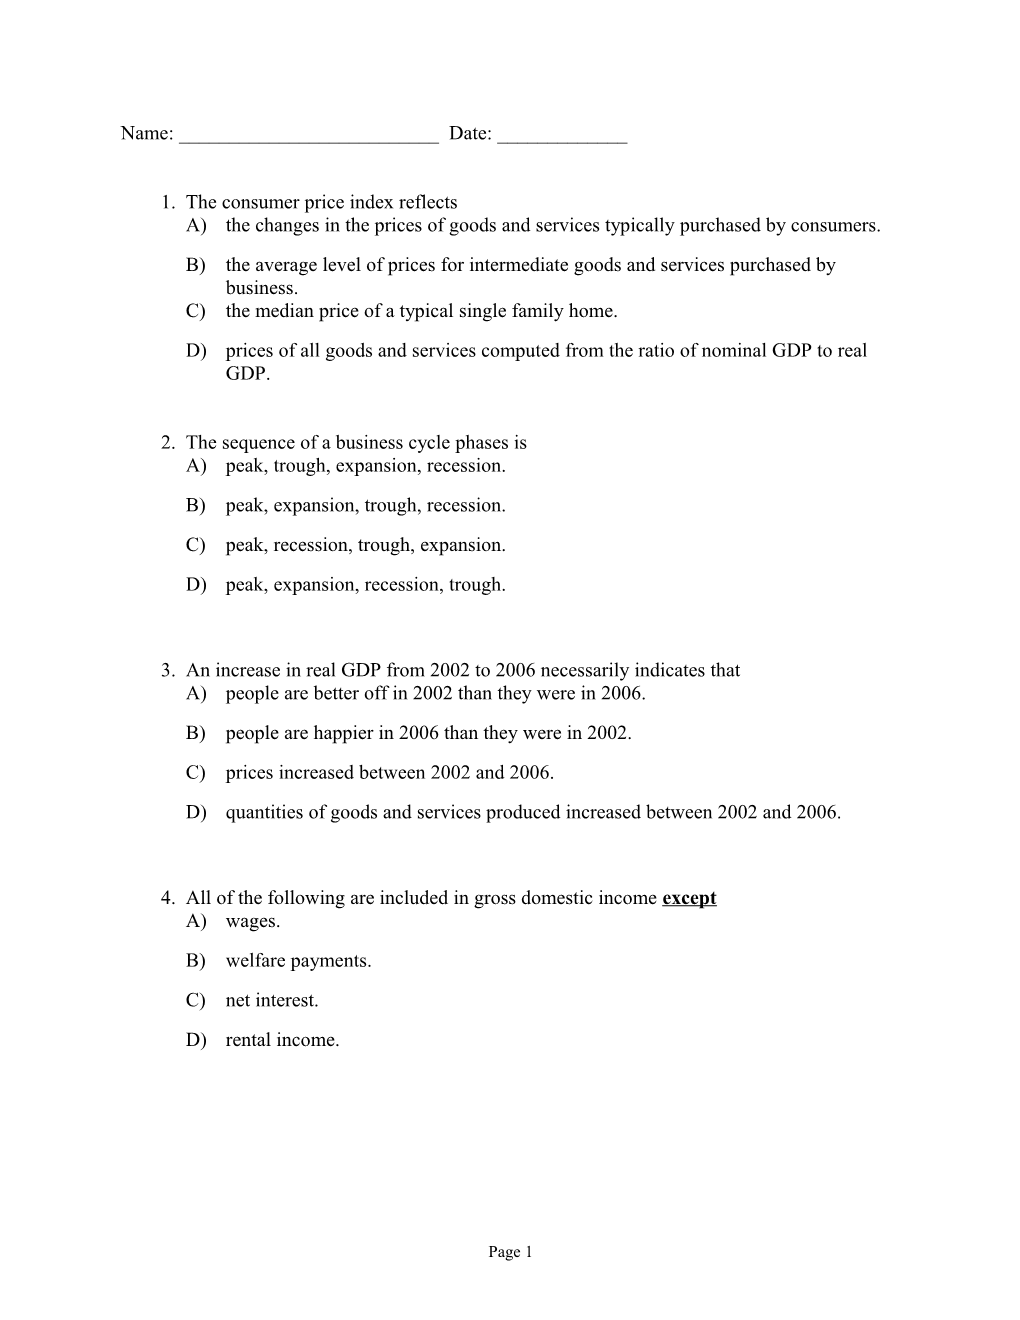 Use the Following to Answer Question 5